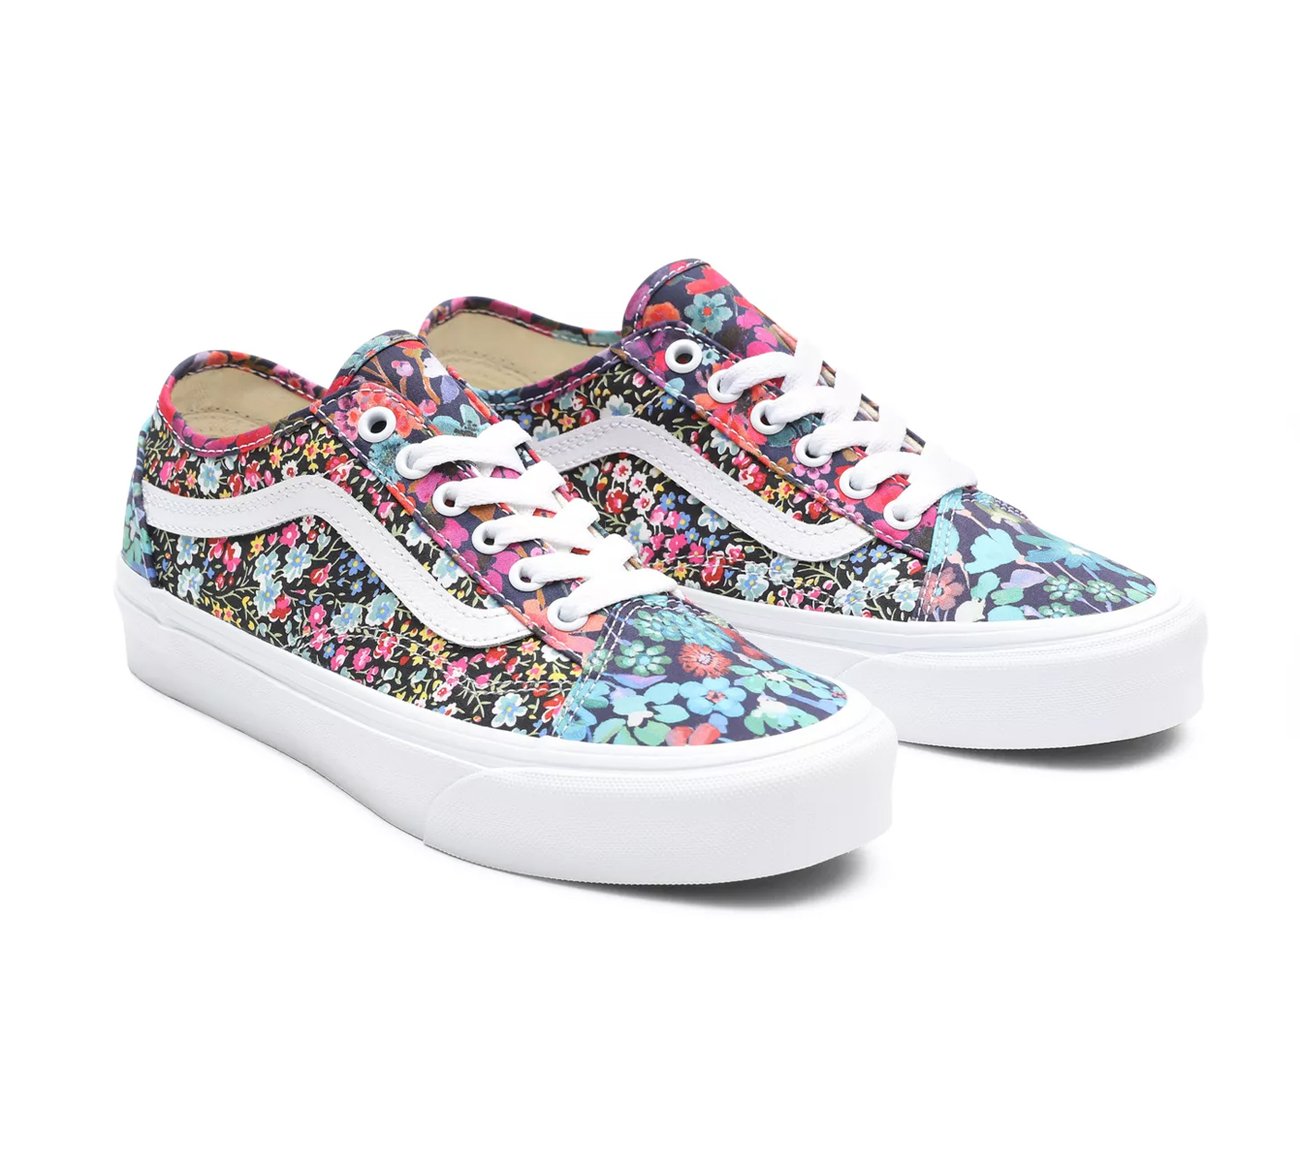 Vans Made with Liberty Fabric Schuhe